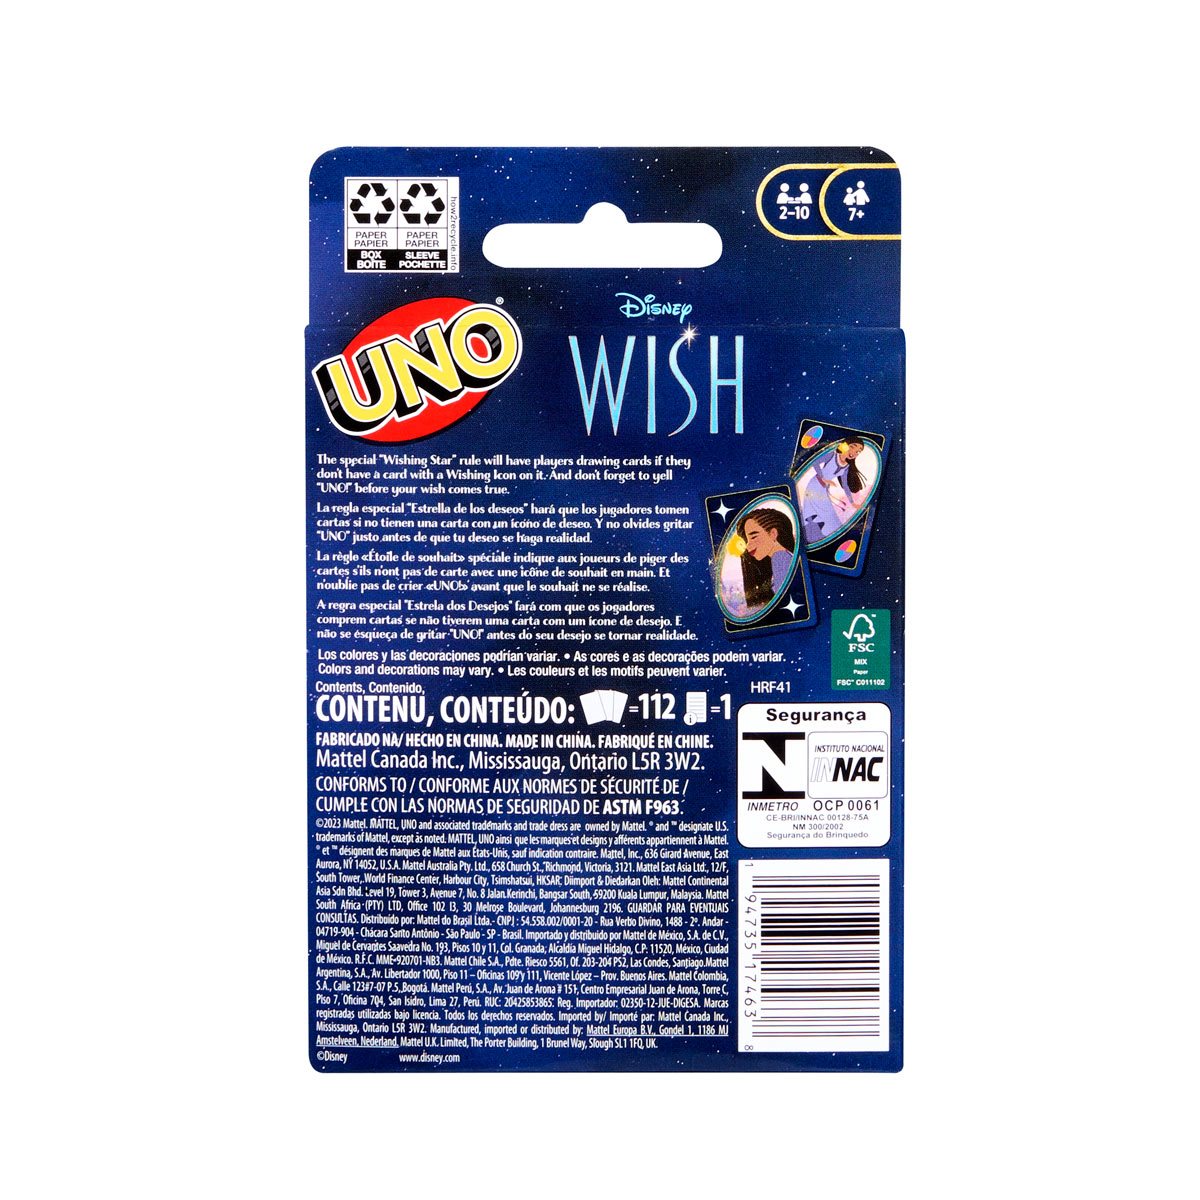 Mattel Games UNO Disney Wish Card Game for Kids, Adults & Family with Deck  & Rule Inspired by the Movie